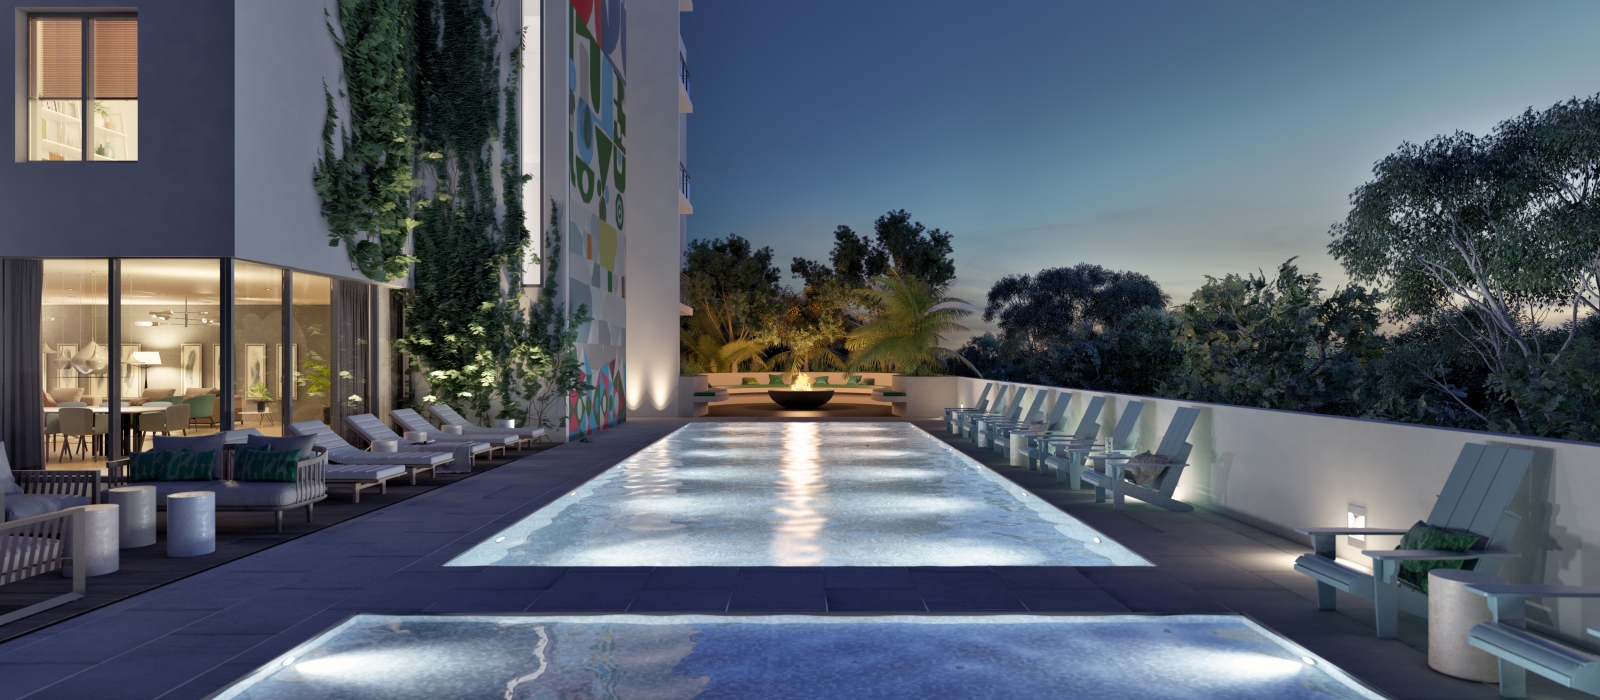 Adding durability to the Arbor Coconut Grove: PENETRON ADMIX provides a reliable waterproofing solution for the pool, the building’s foundation slab, retaining walls and below-grade elevator pits.